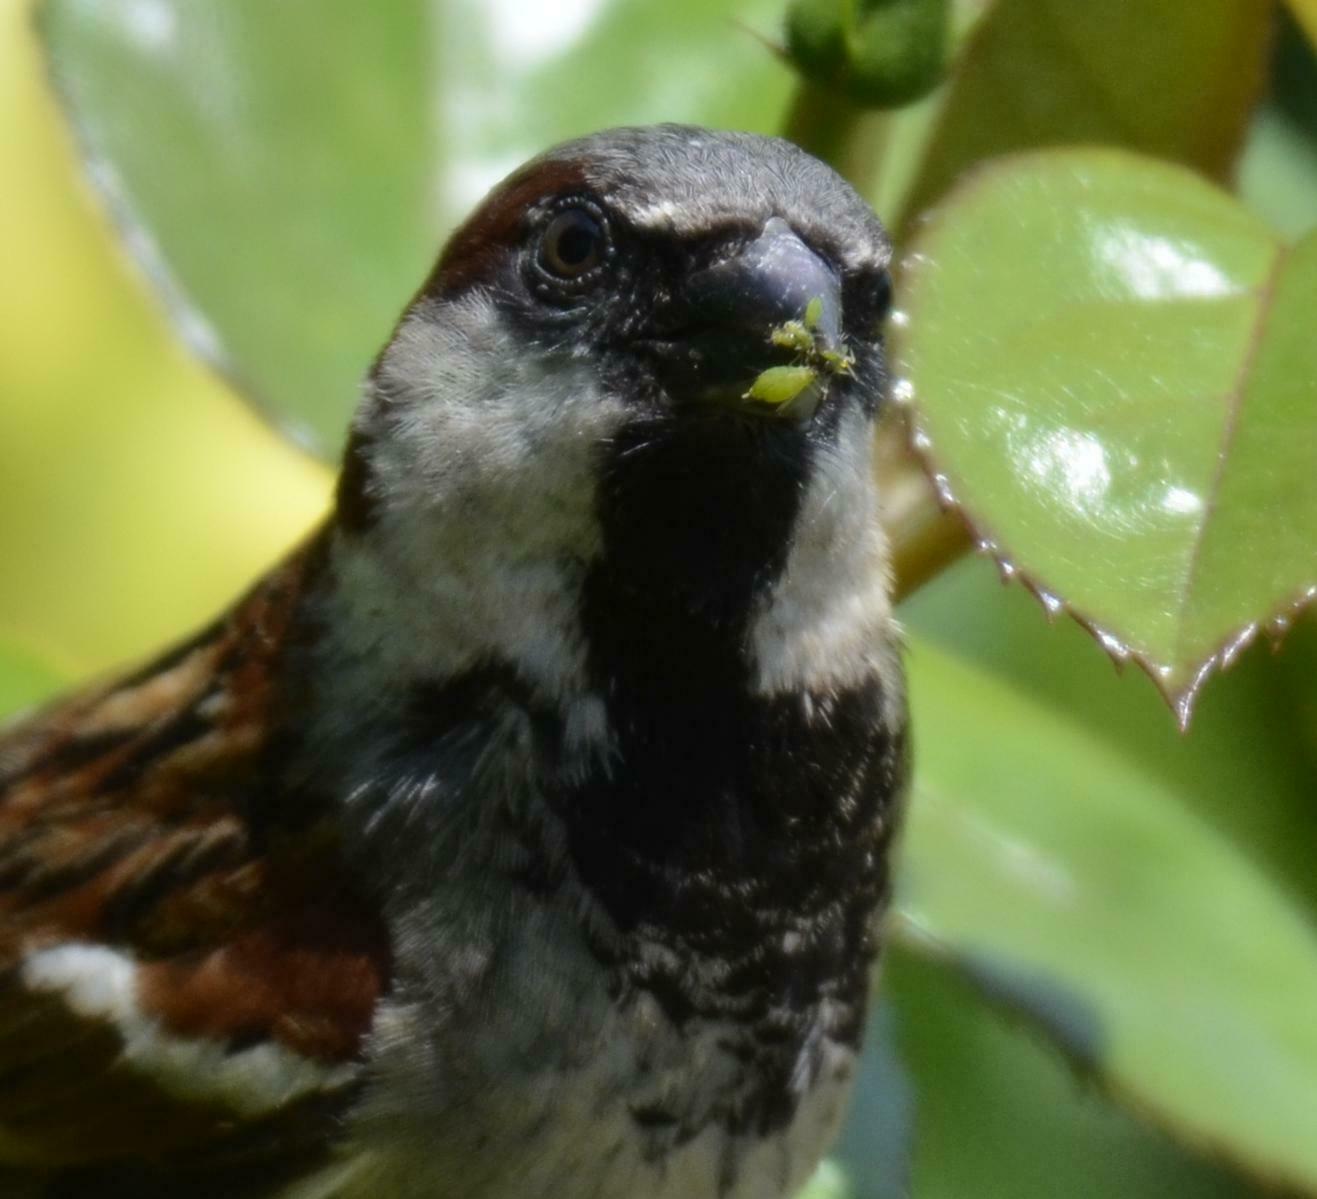 Close up of sparrow with greenfly in its beak